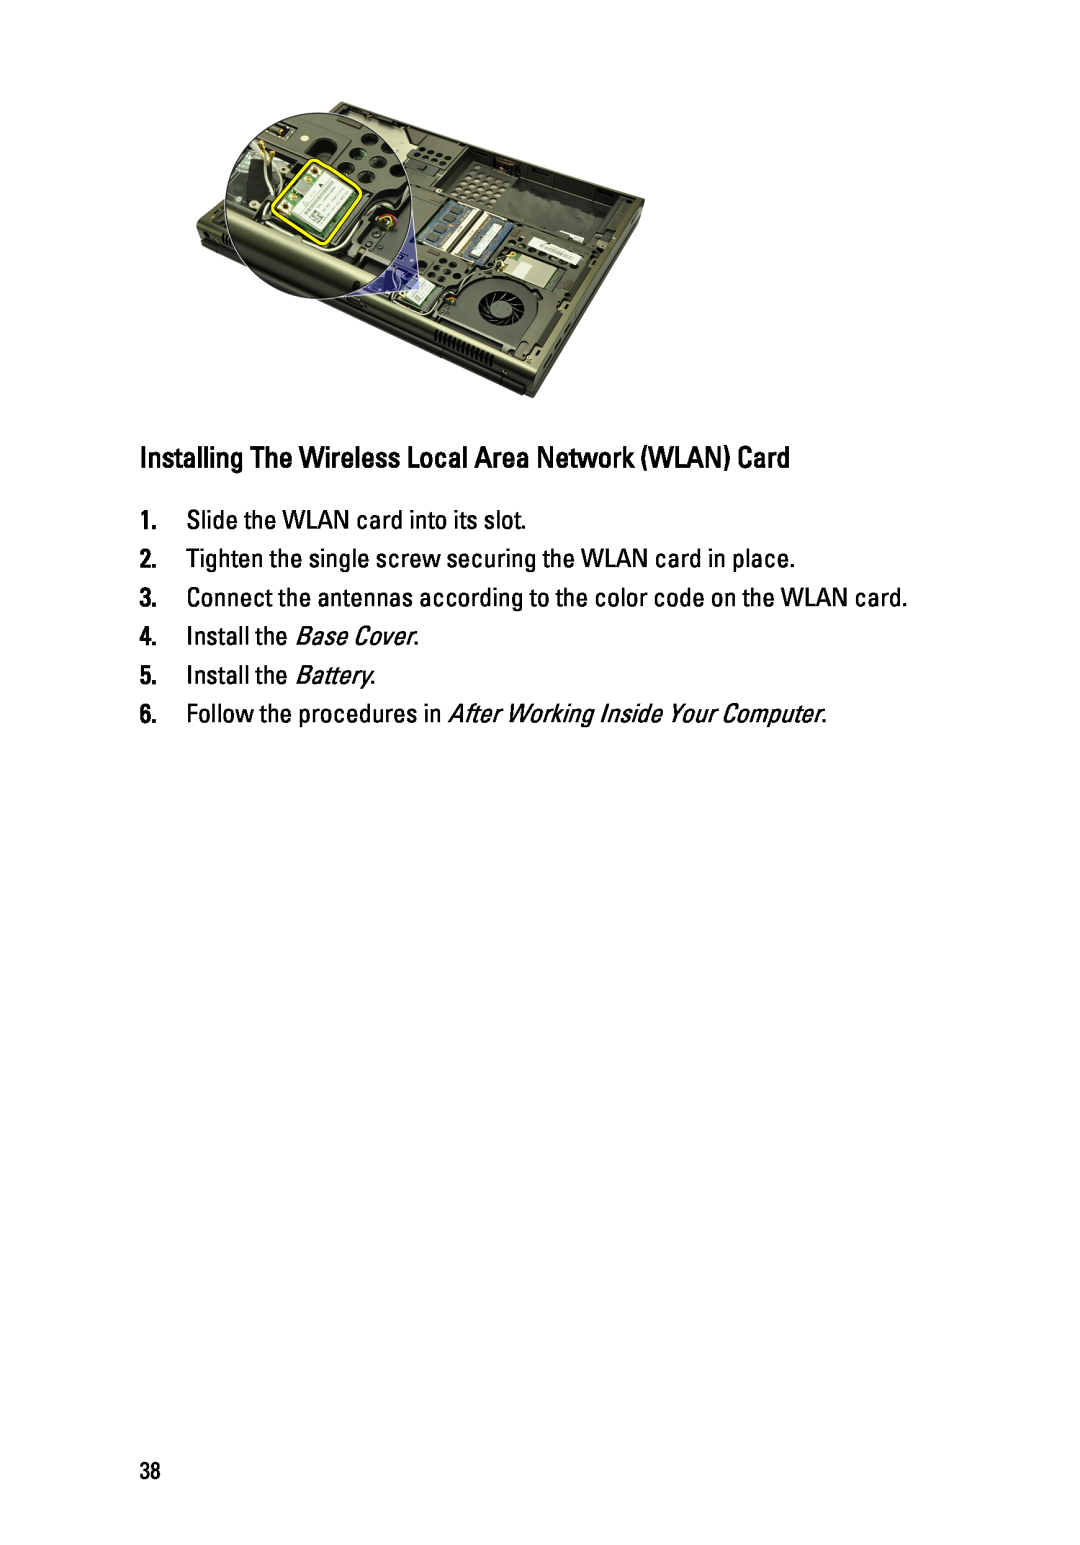 Dell M4600 owner manual Installing The Wireless Local Area Network WLAN Card, Slide the WLAN card into its slot 